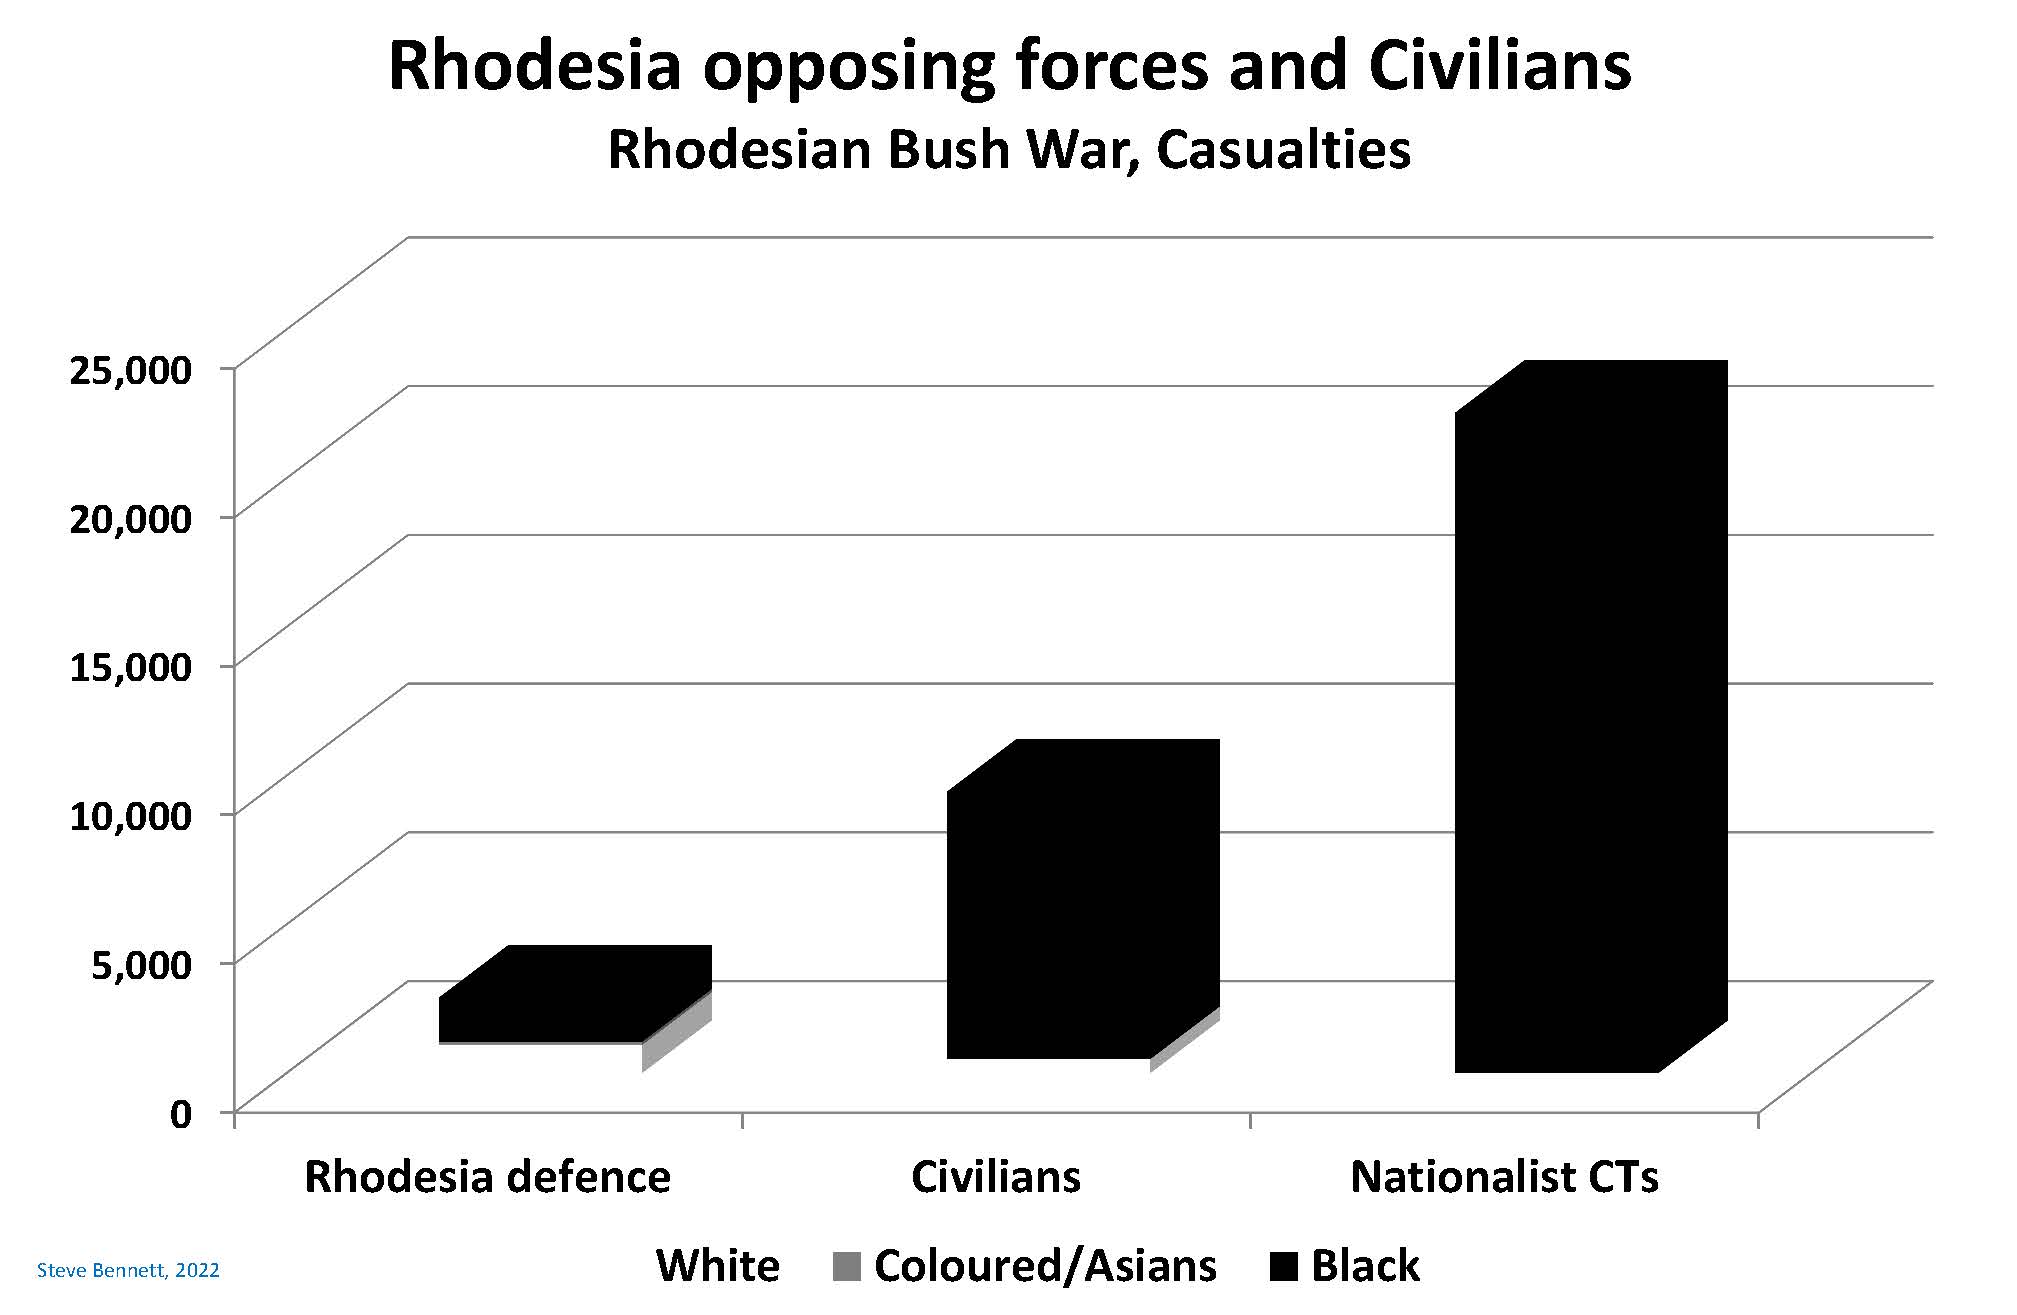 Casualties of opposing forces and civilians during Rhodesian Bush War by race